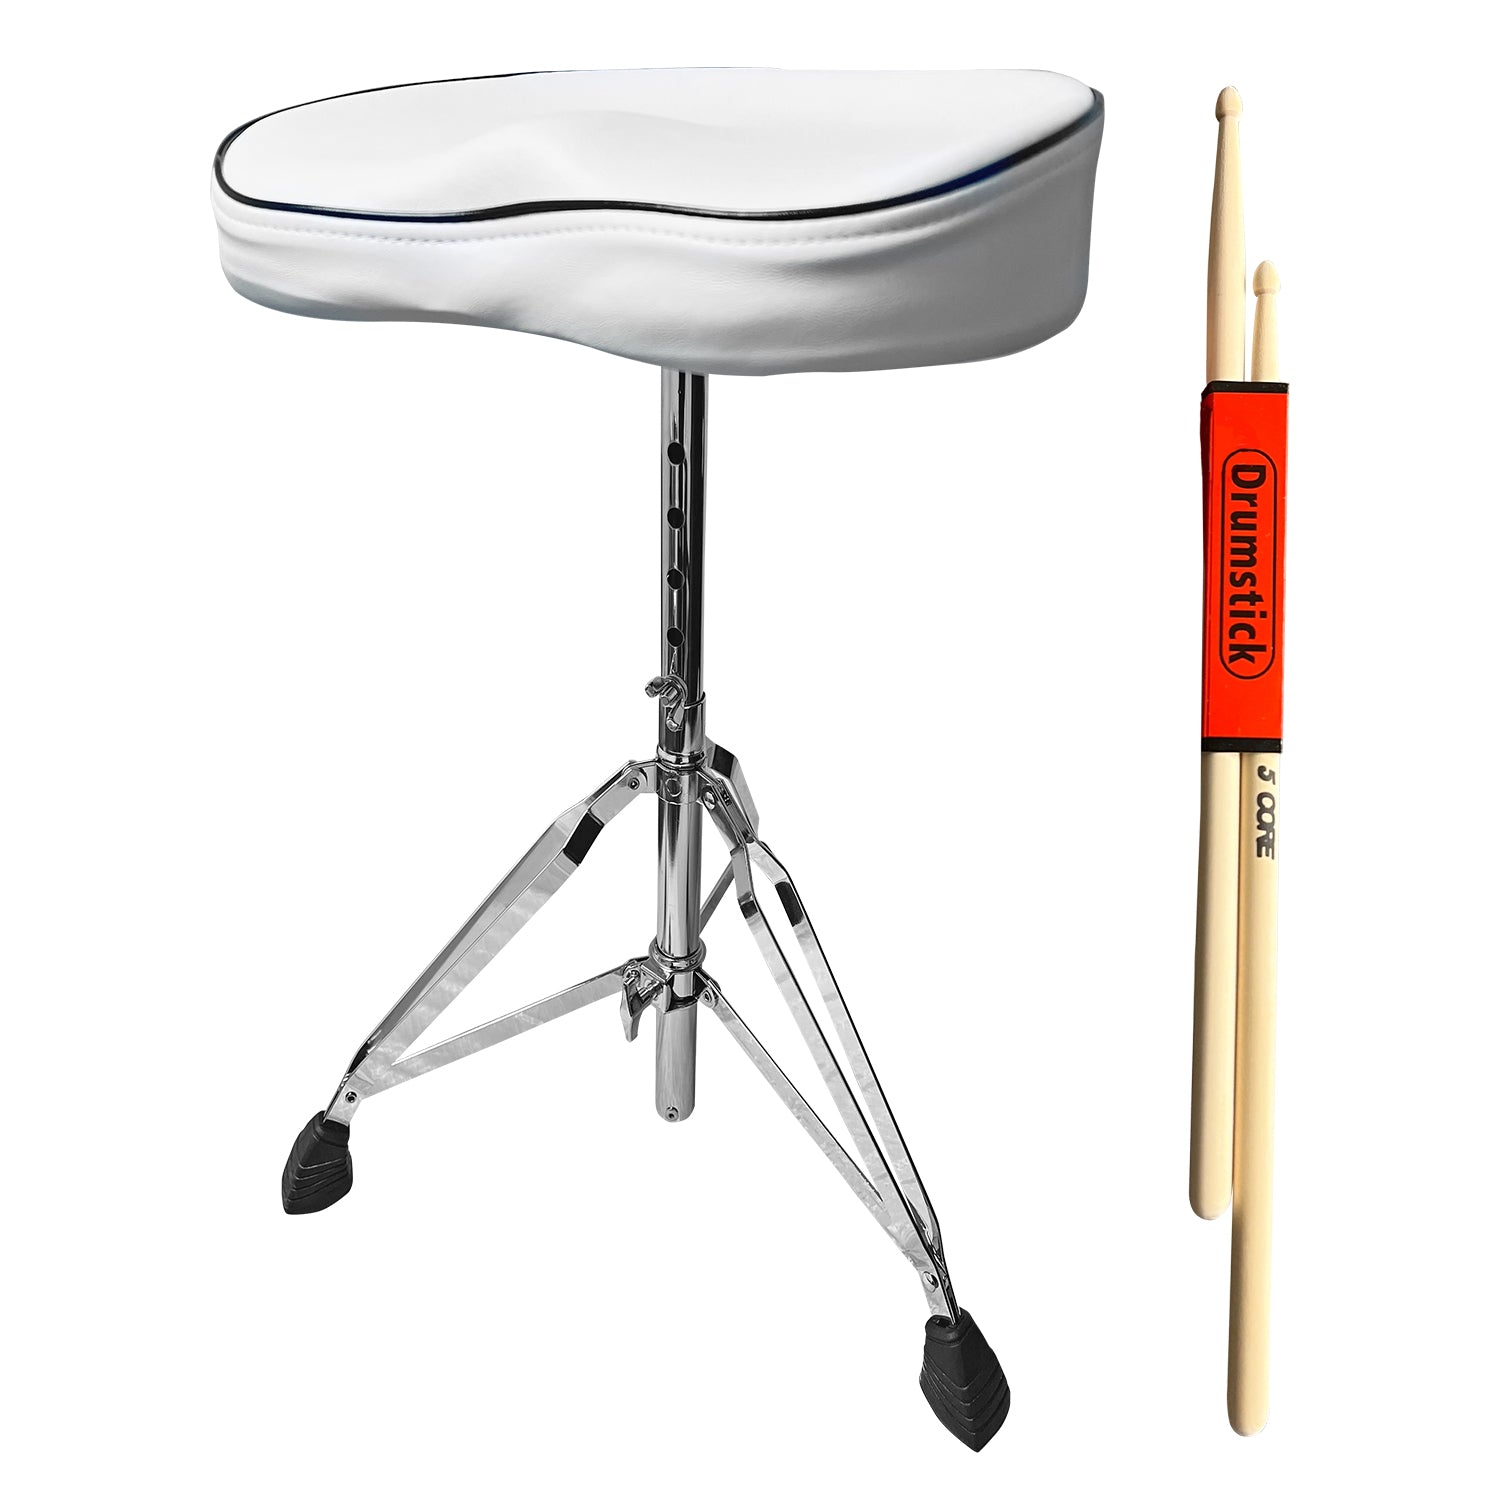 5 CORE Drum Throne Thick Padded Comfortable Guitar Stool with Memory Foam Adjustable White Drum Stool